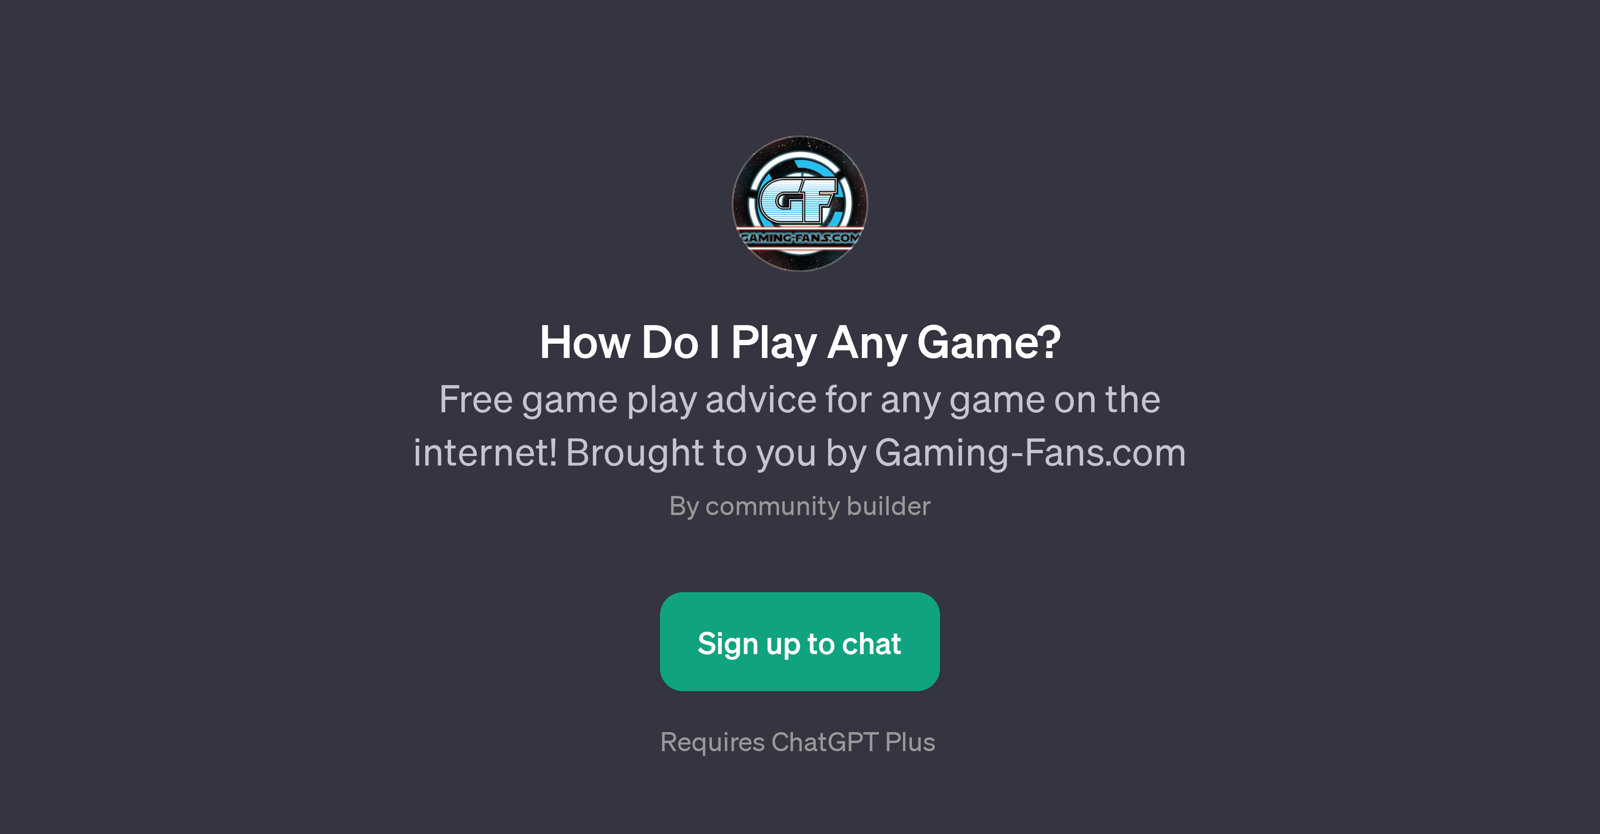 How Do I Play Any Game? website